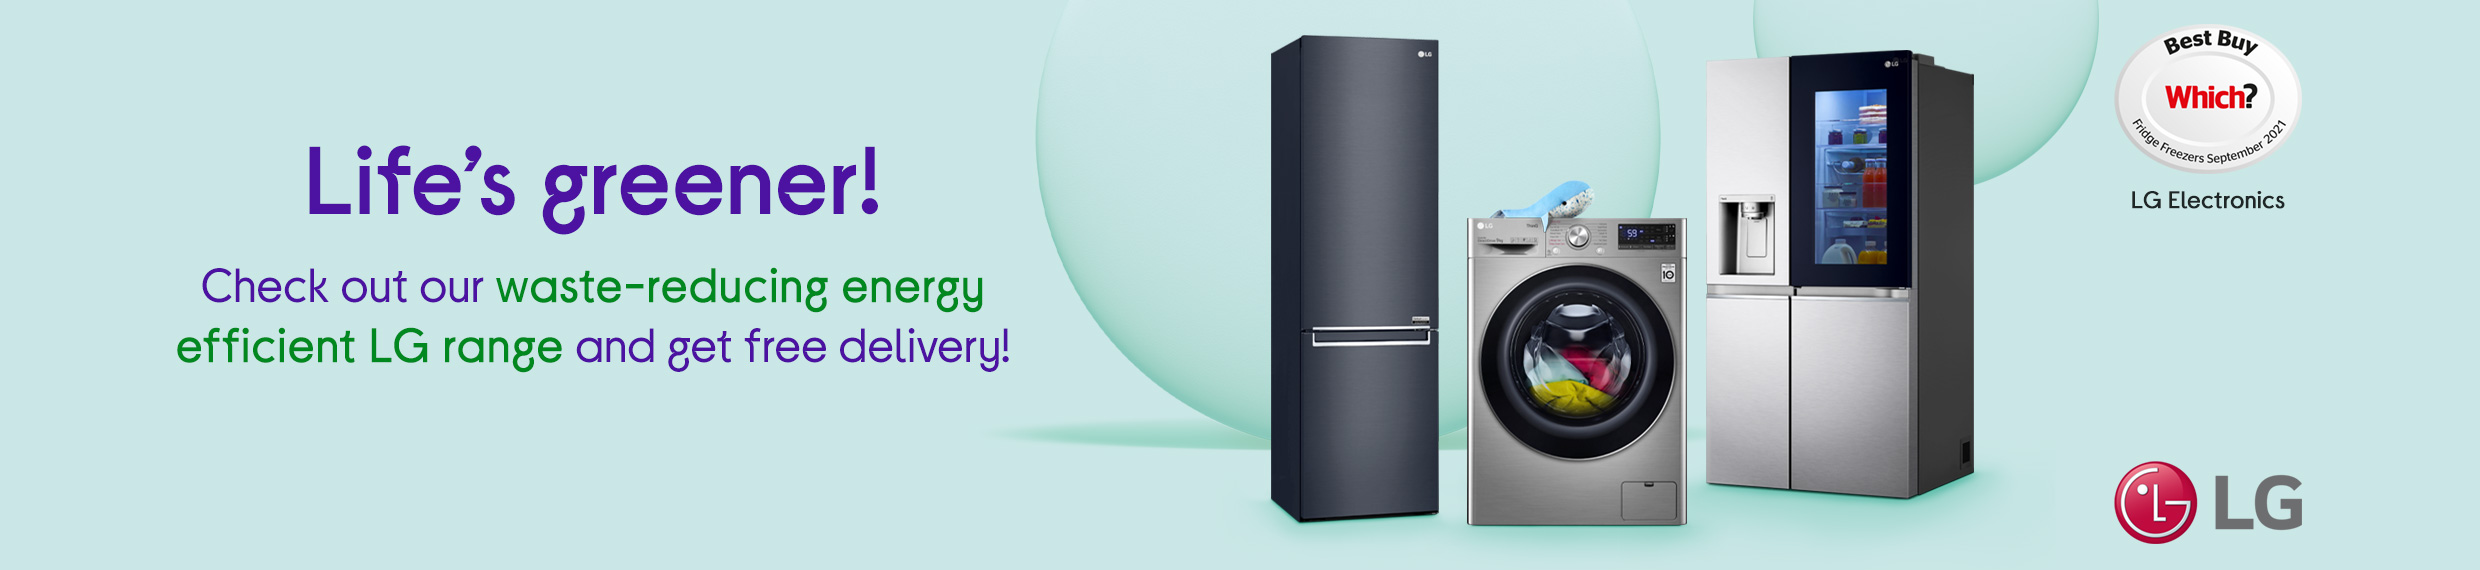 Go green with free delivery on energy efficient LG products